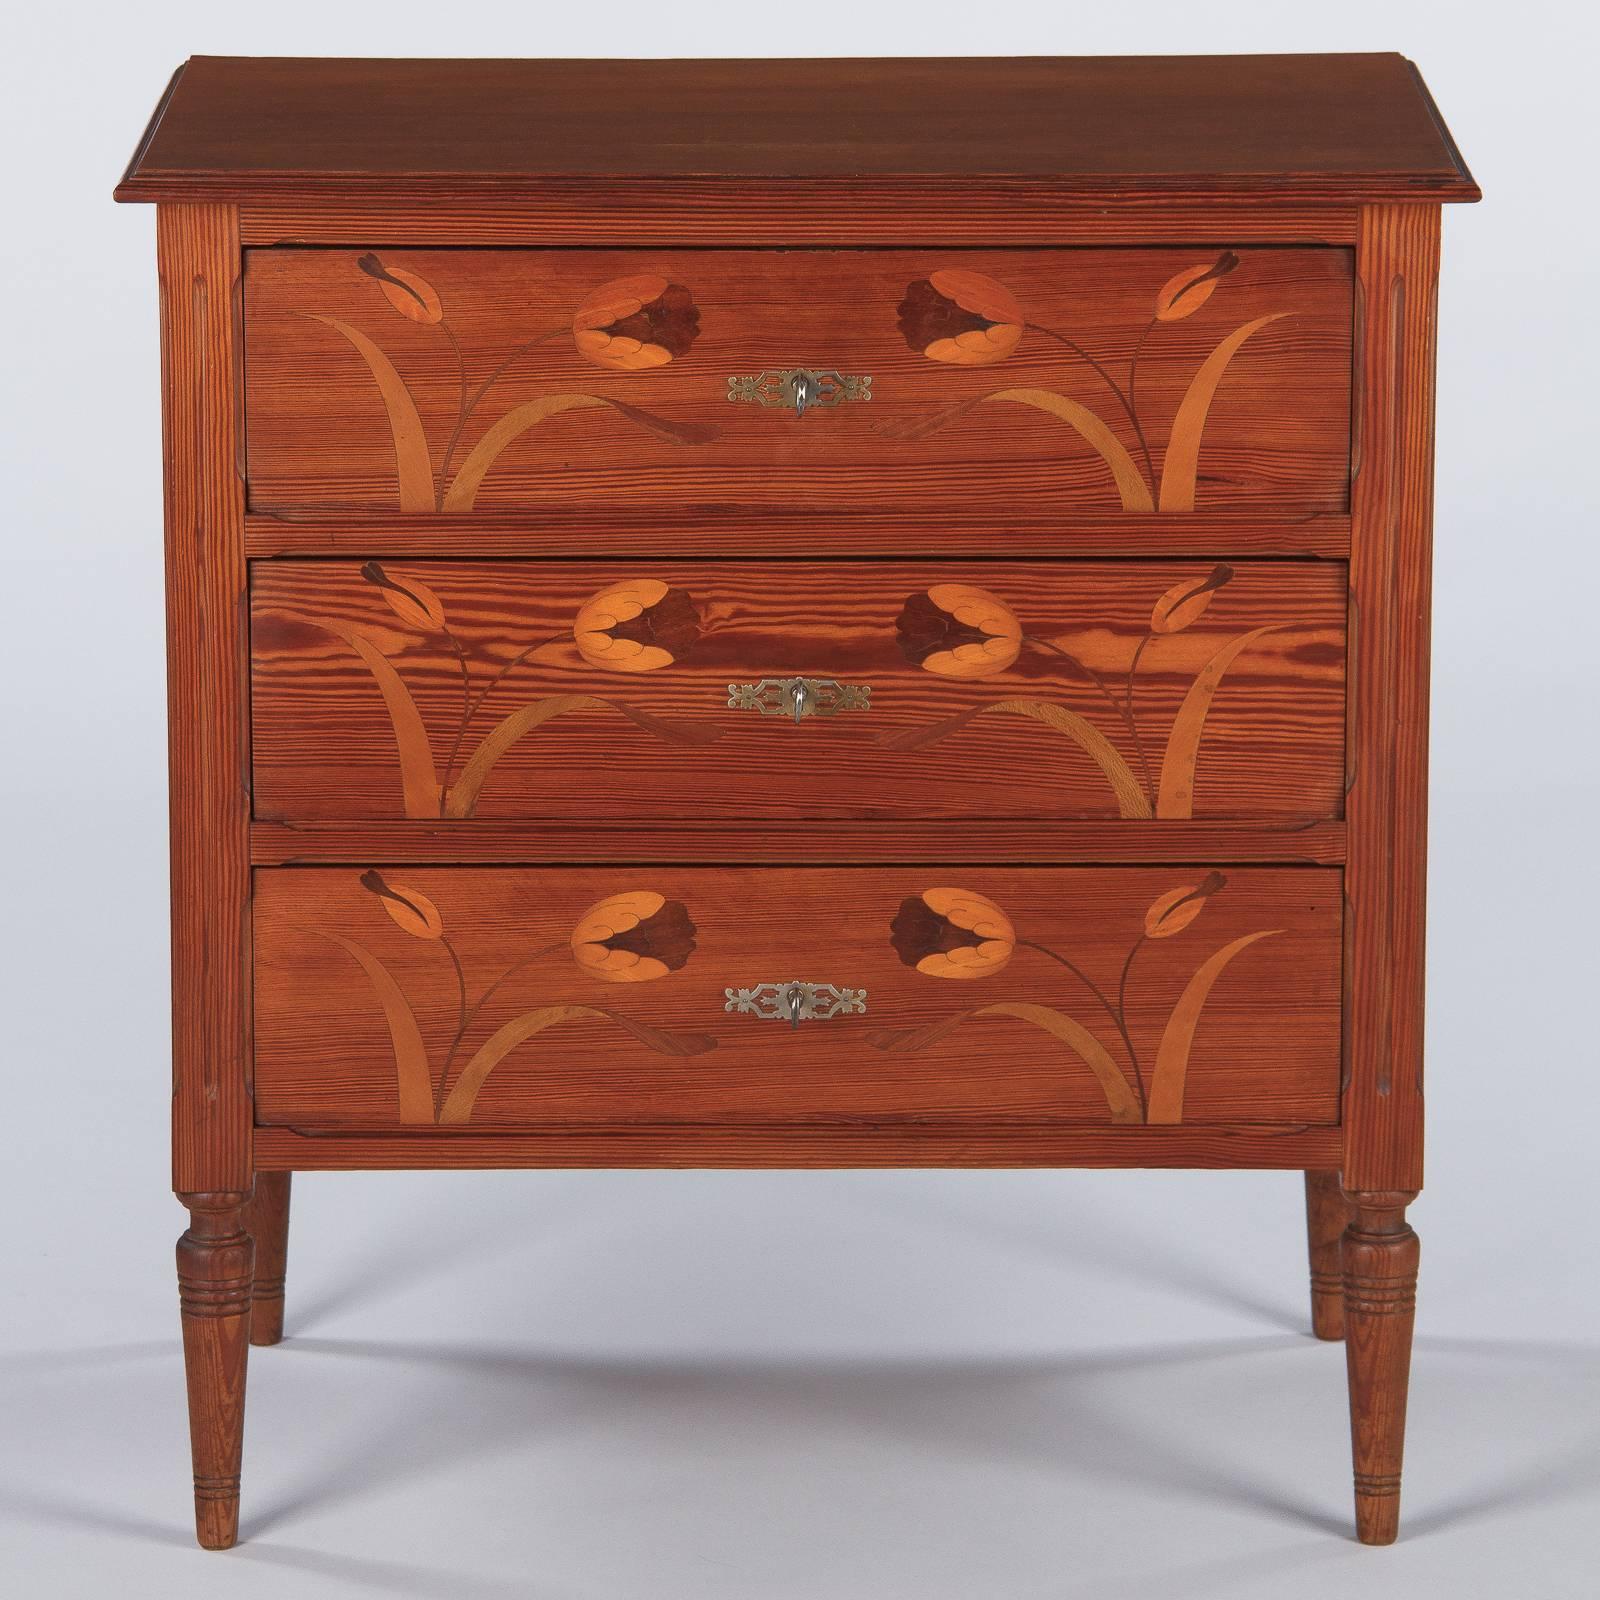 A very fine Art Nouveau inlaid chest of drawers in pitch pine, French, circa 1900. This piece features stand-out inlay on the drawer fronts, as well as the panelled sides. Elegant and very tight inlaid fruitwoods form delicate tulips, with full